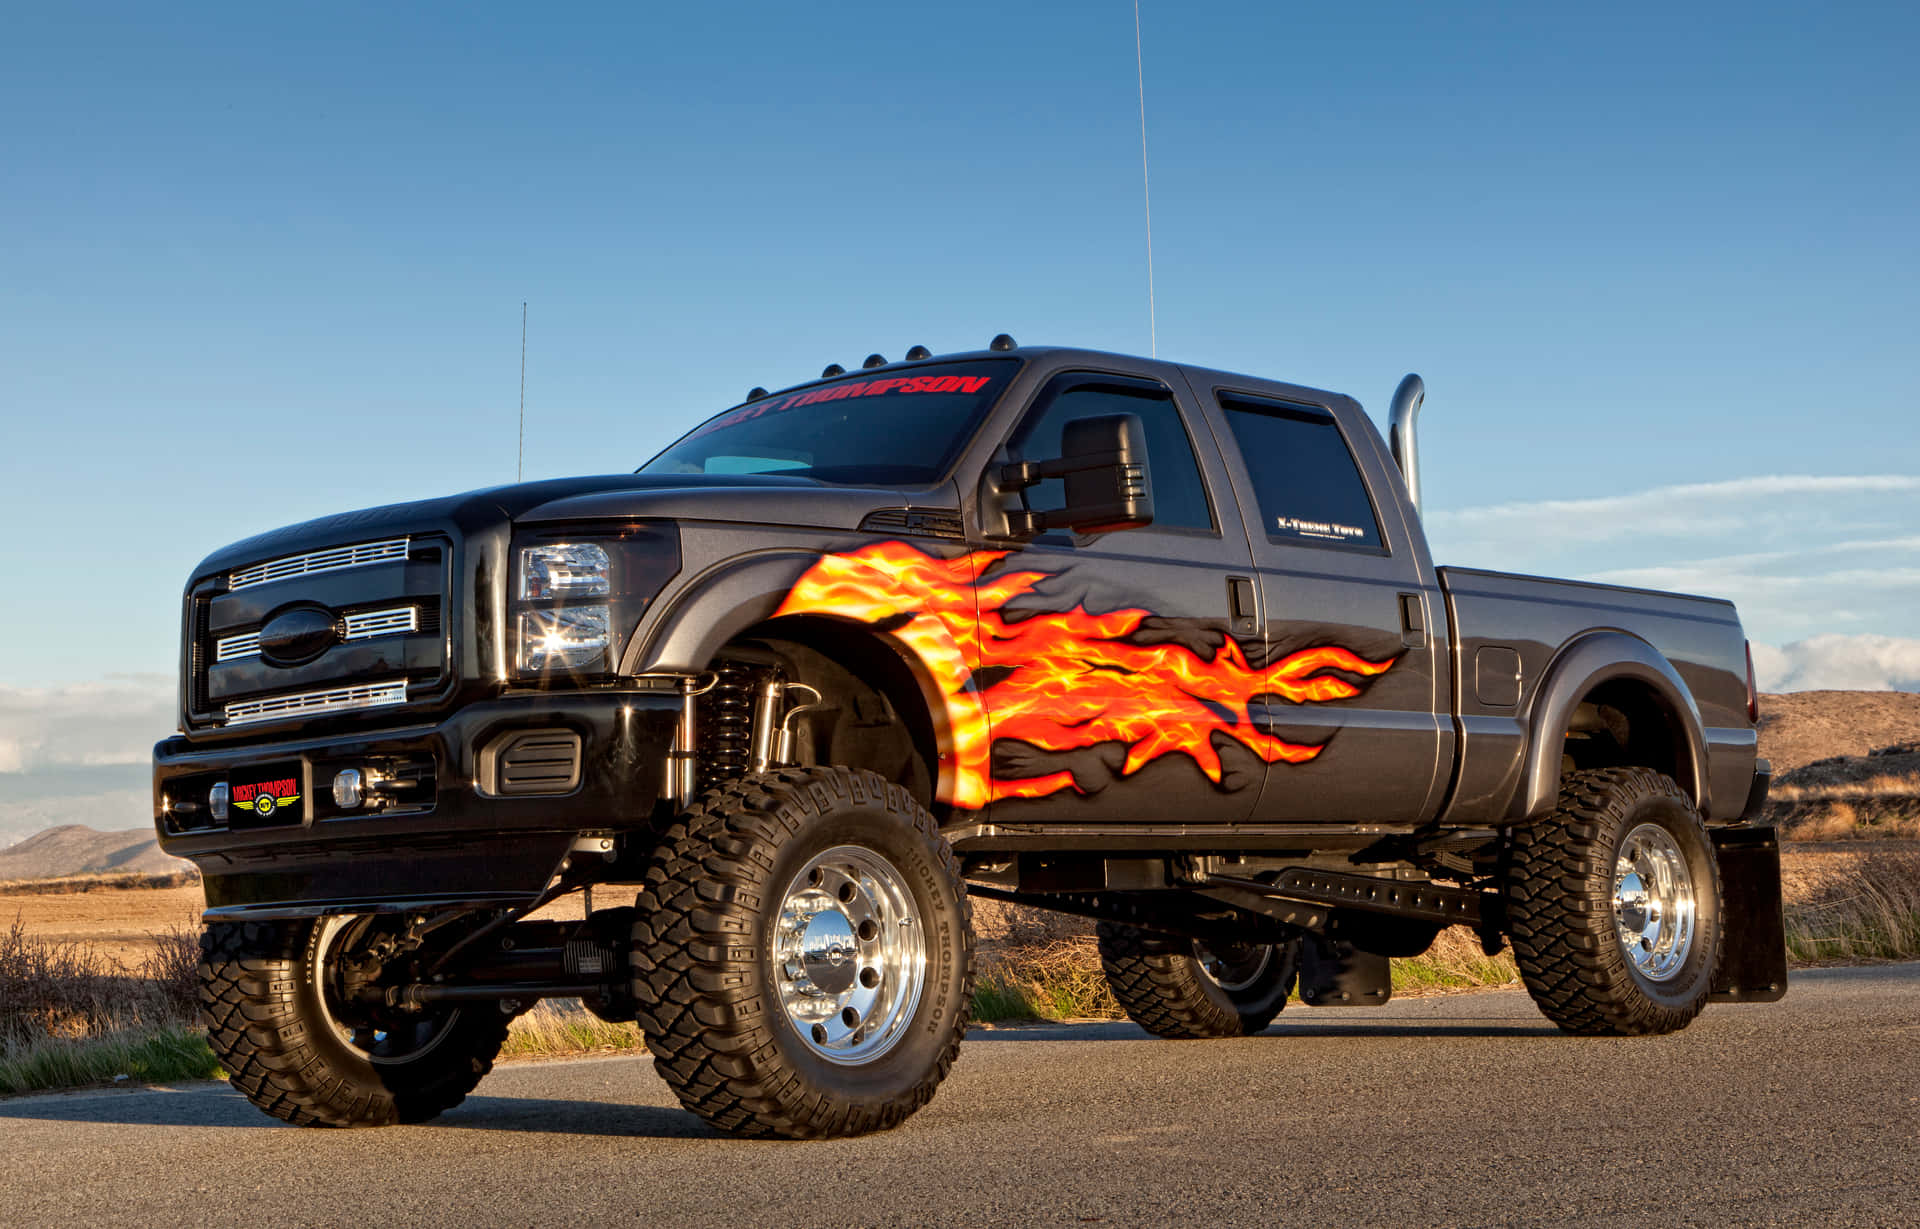 A Black Truck With Flames On It Background